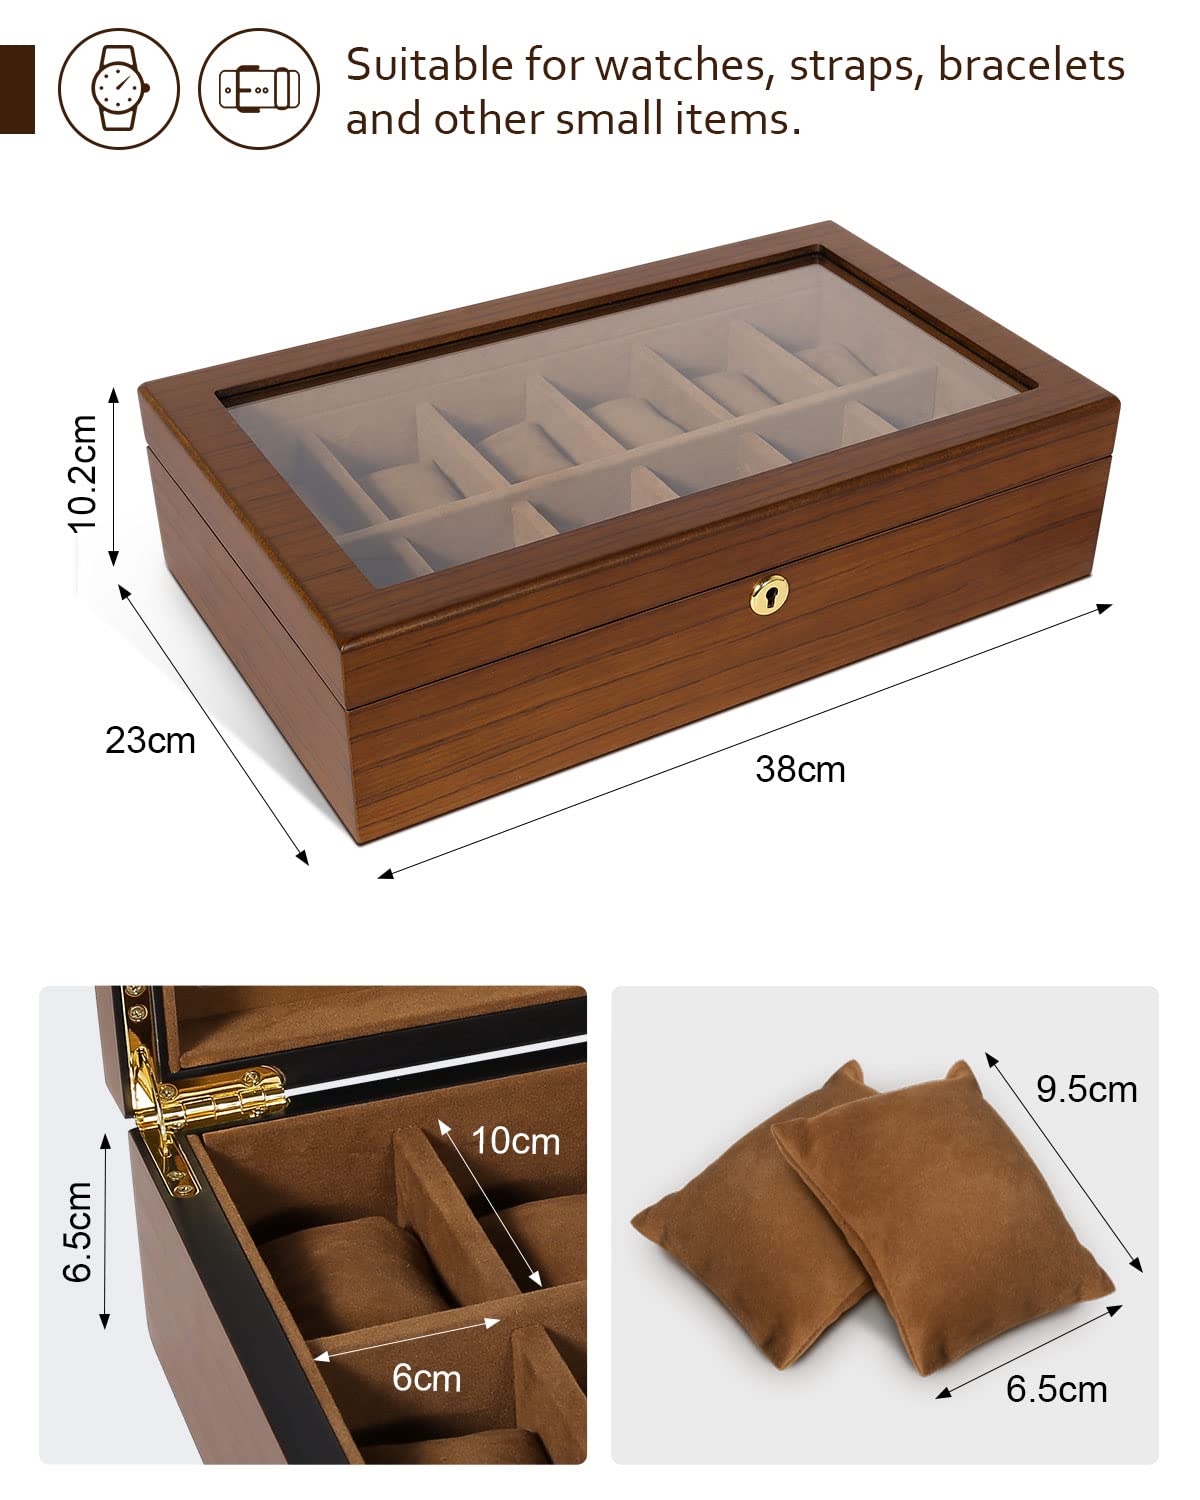 Uten Watch Box with 12 Slots, Watch Case Organizer with Golden Lock and Key, Wooden Watch Display Storage Box with Removable Watch Cushions, Velvet Lining, Metal Clasp, Gift for Men & Women